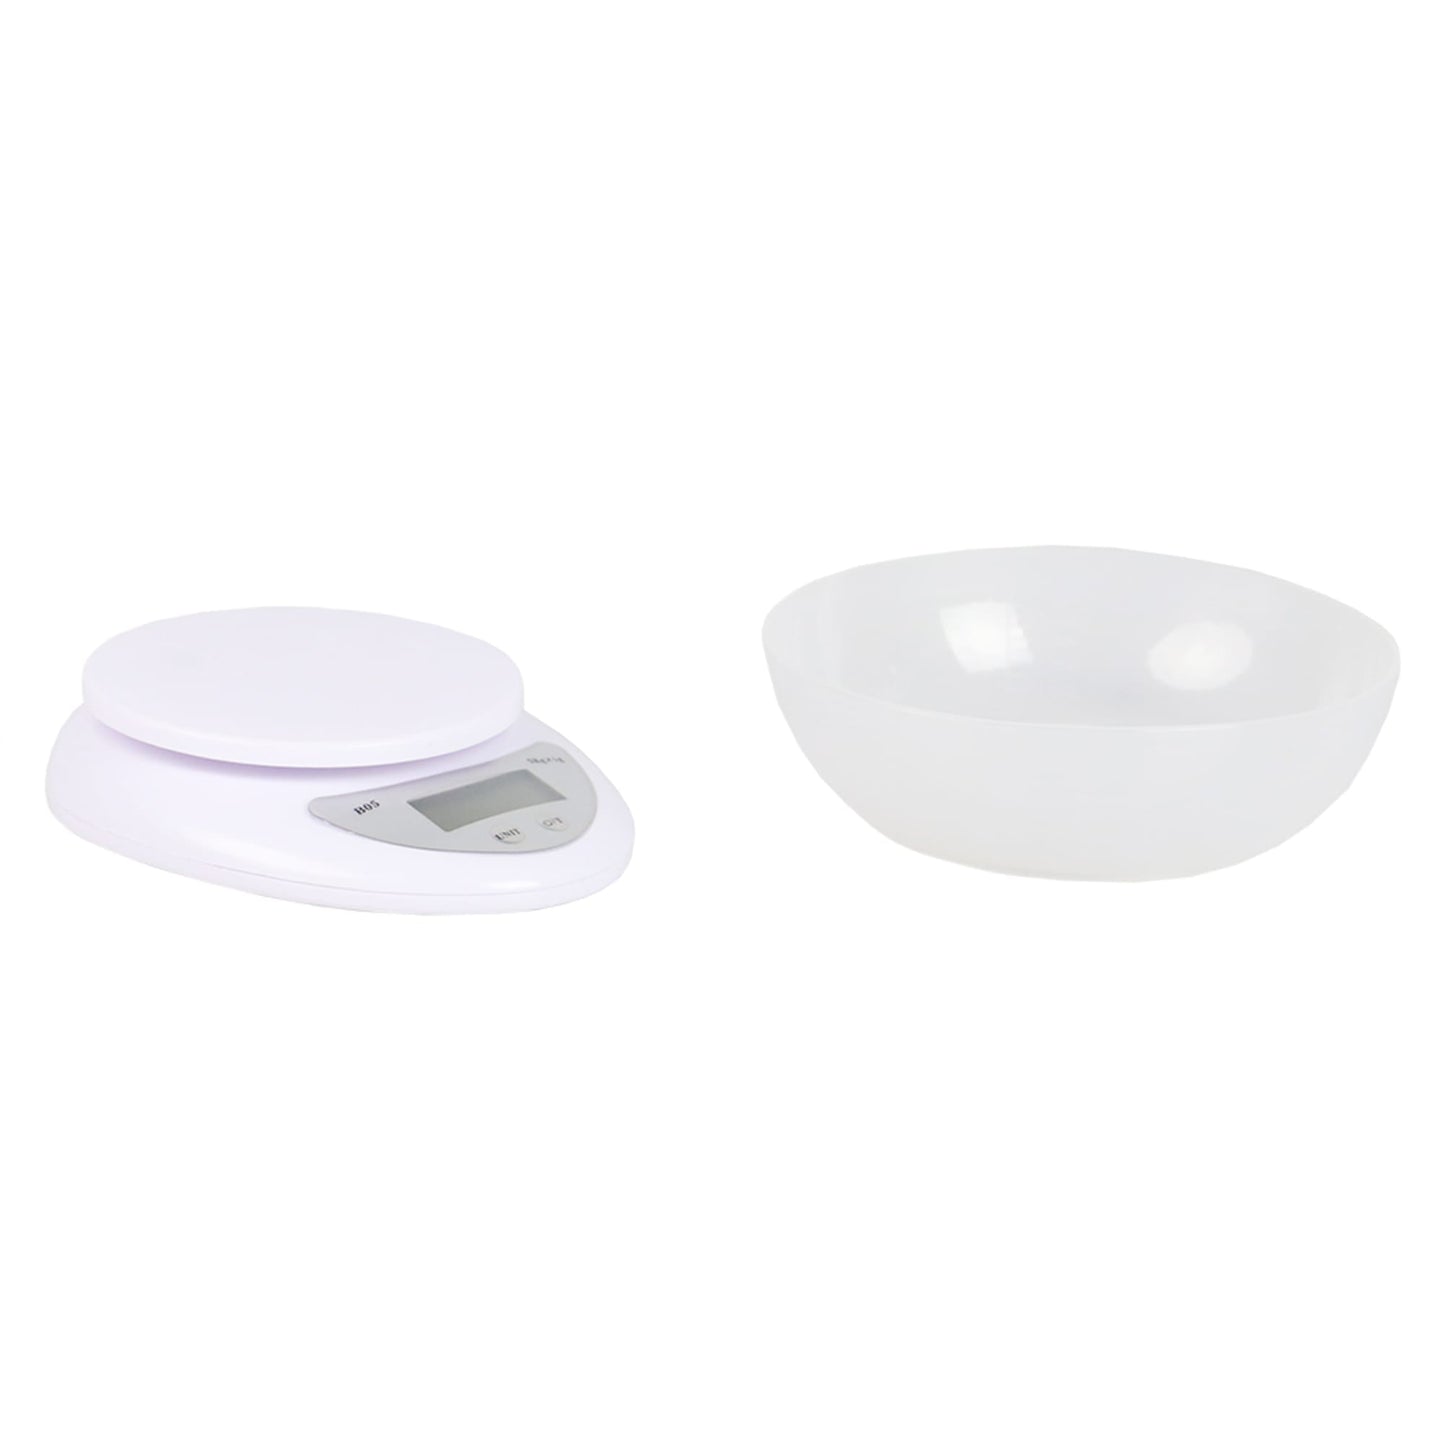 Digital Food Scale with Plastic Bowl, White